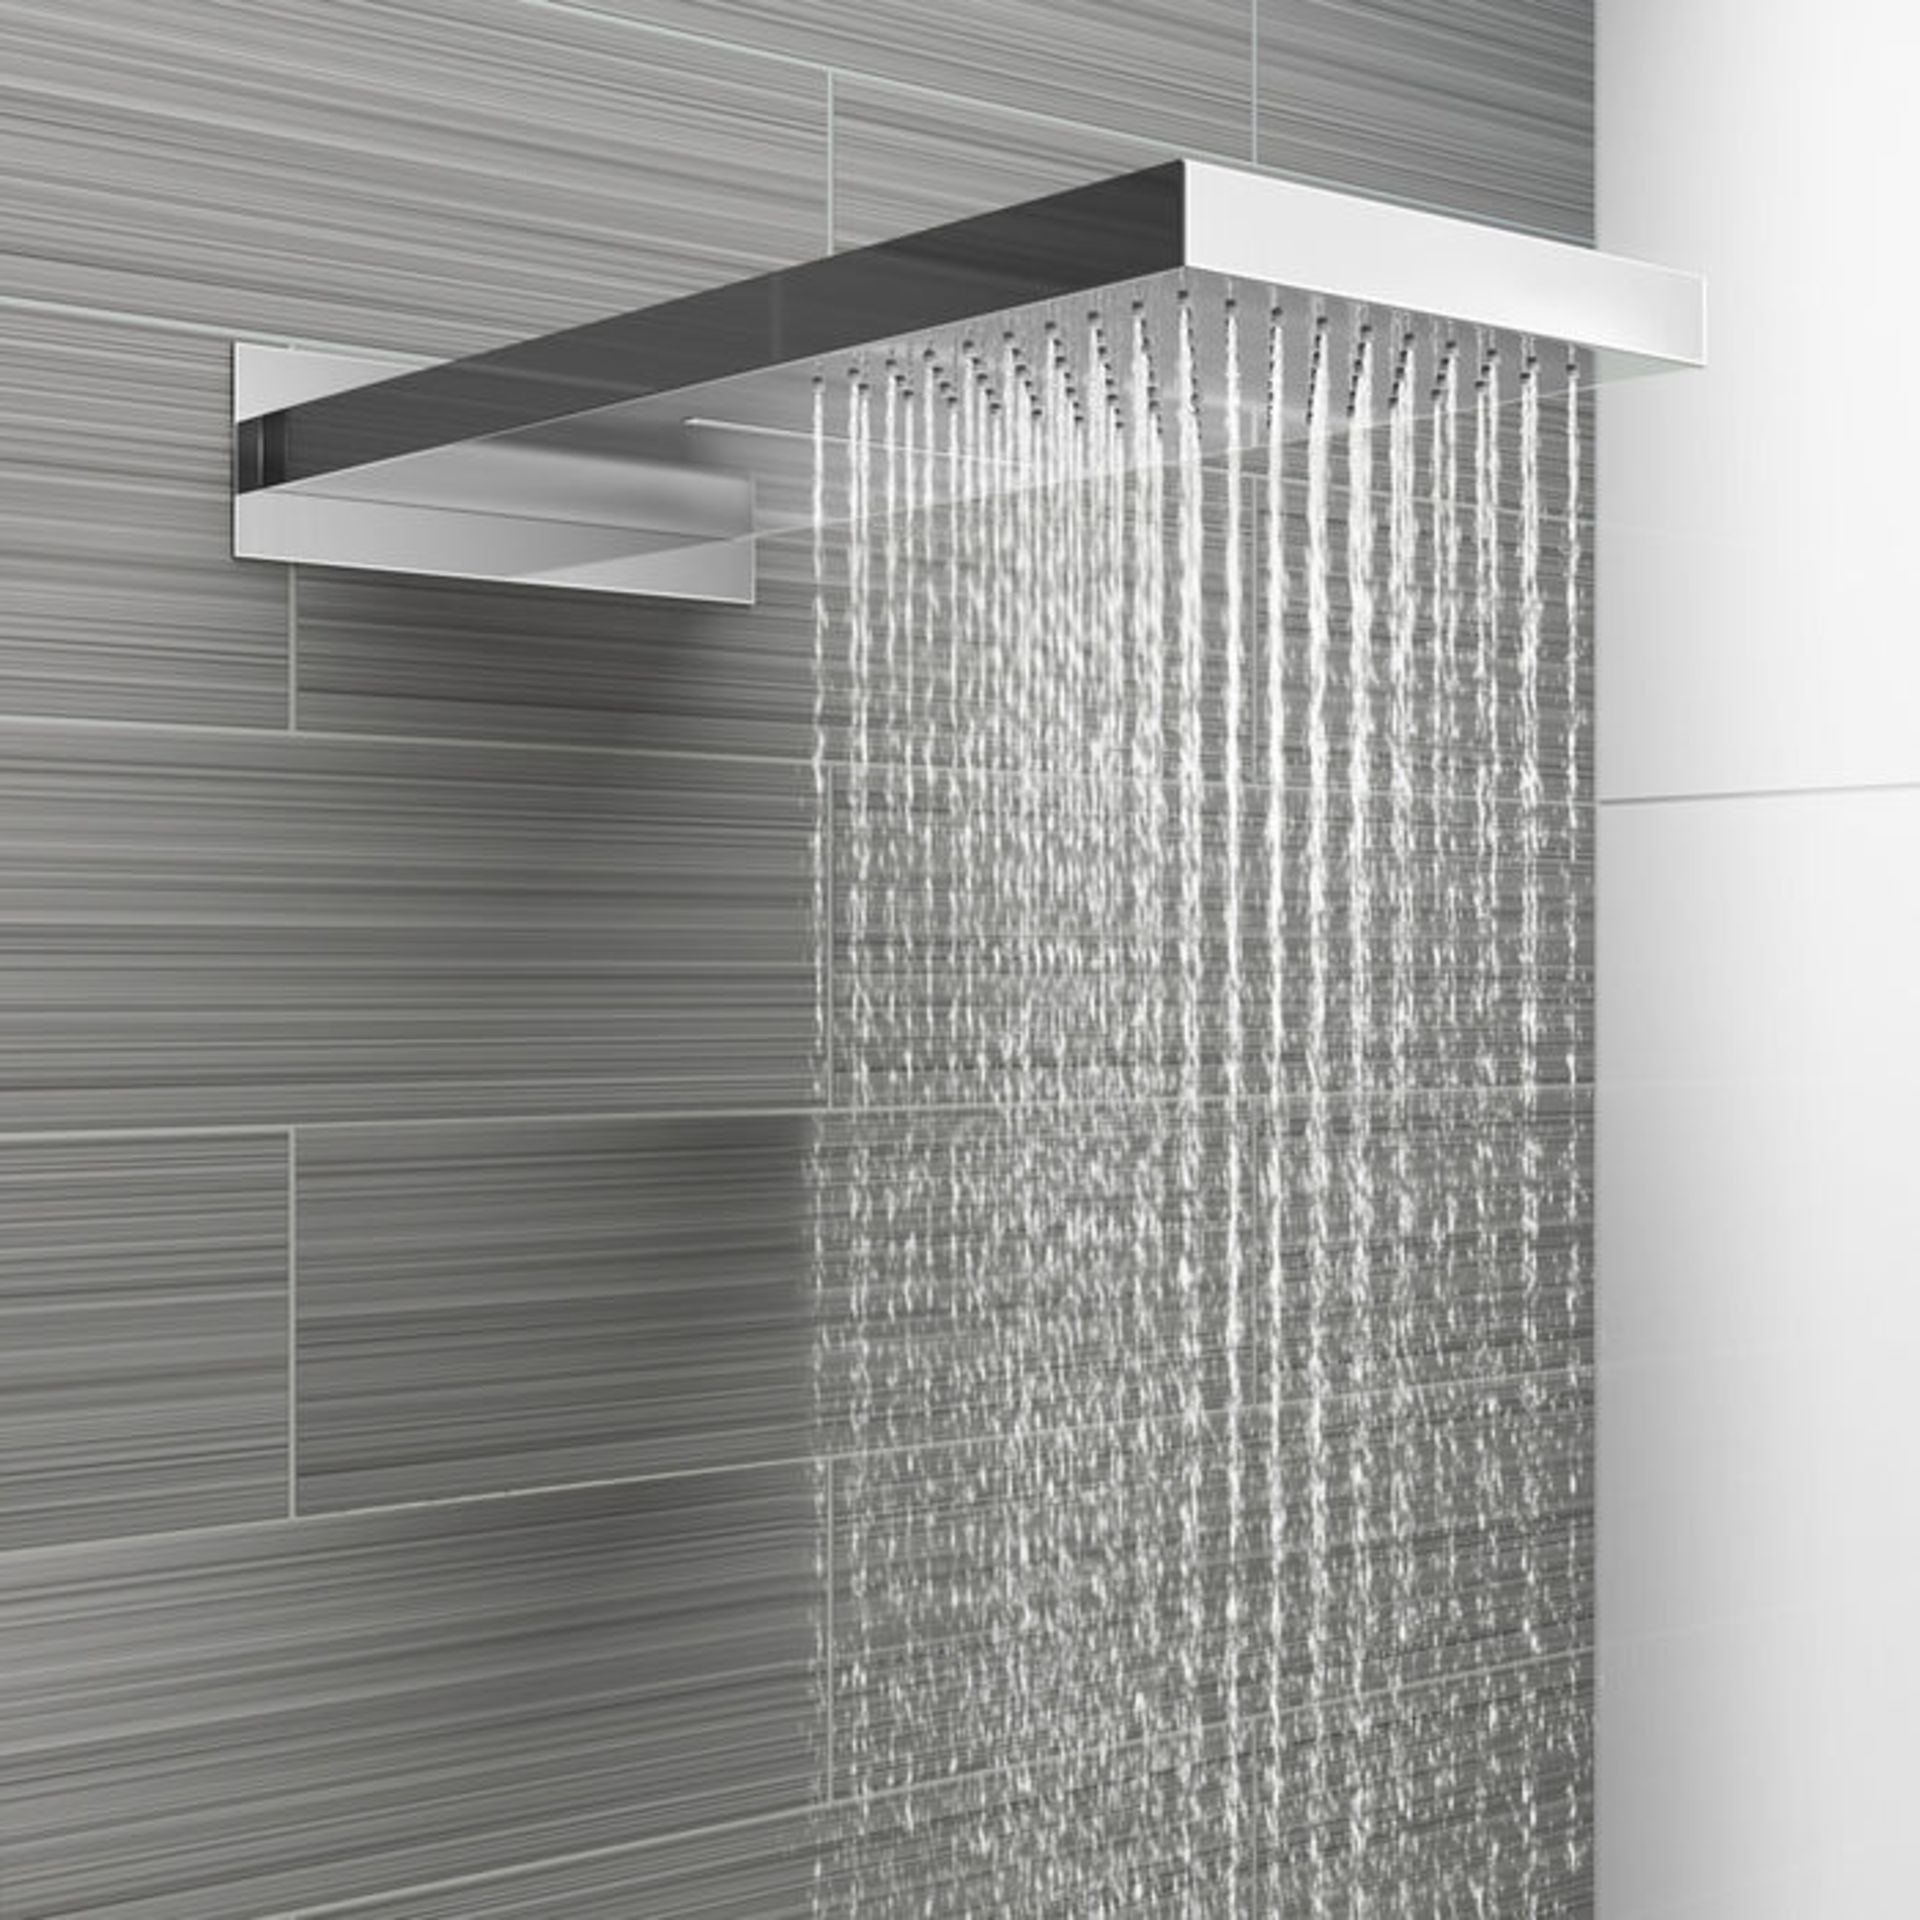 (CT7) 230x500mm Stainless Steel Waterfall Shower Head. RRP £374.98. Dual function waterfall and - Image 8 of 12